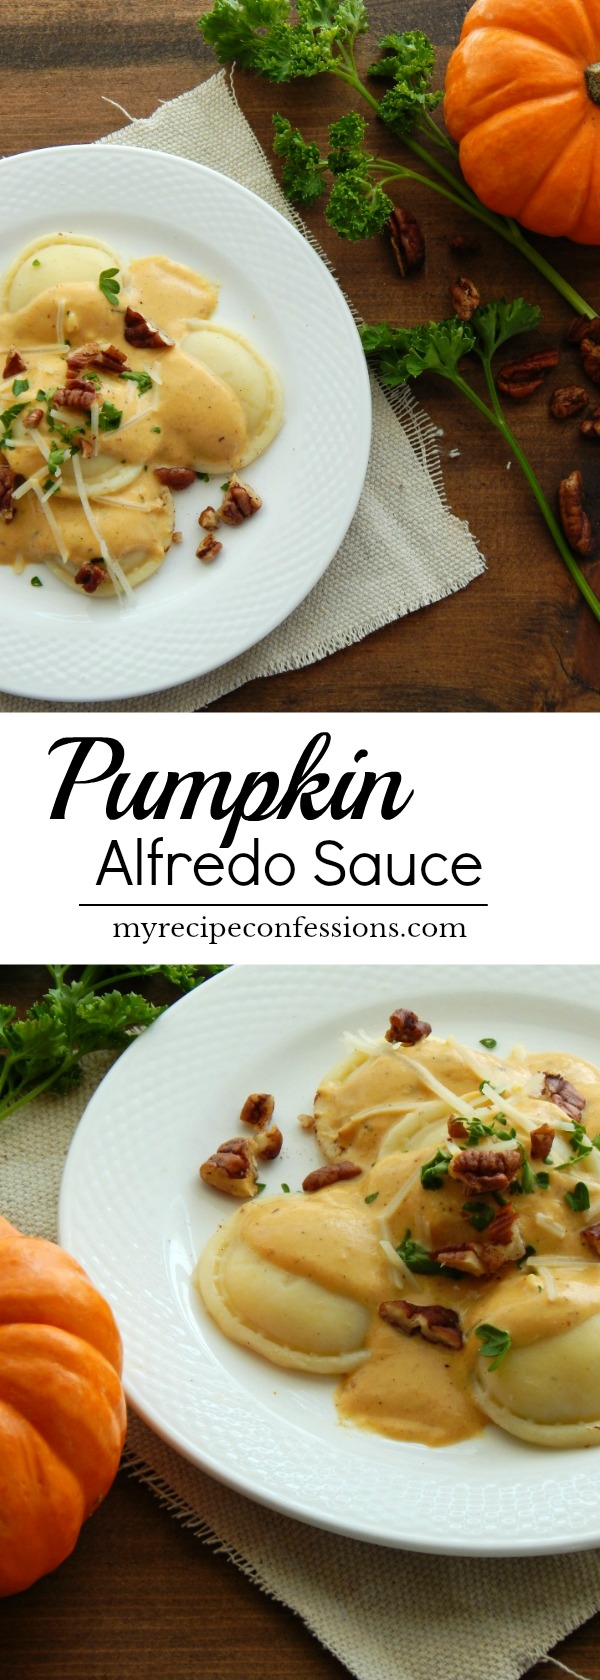 Pumpkin Alfredo Sauce is smooth and creamy sauce, with a subtle sweetness from the pumpkin. Don't let the name fool you, this is a very easy recipe to make. Serve it over a bed of pasta for the perfect fall or winter dinner!